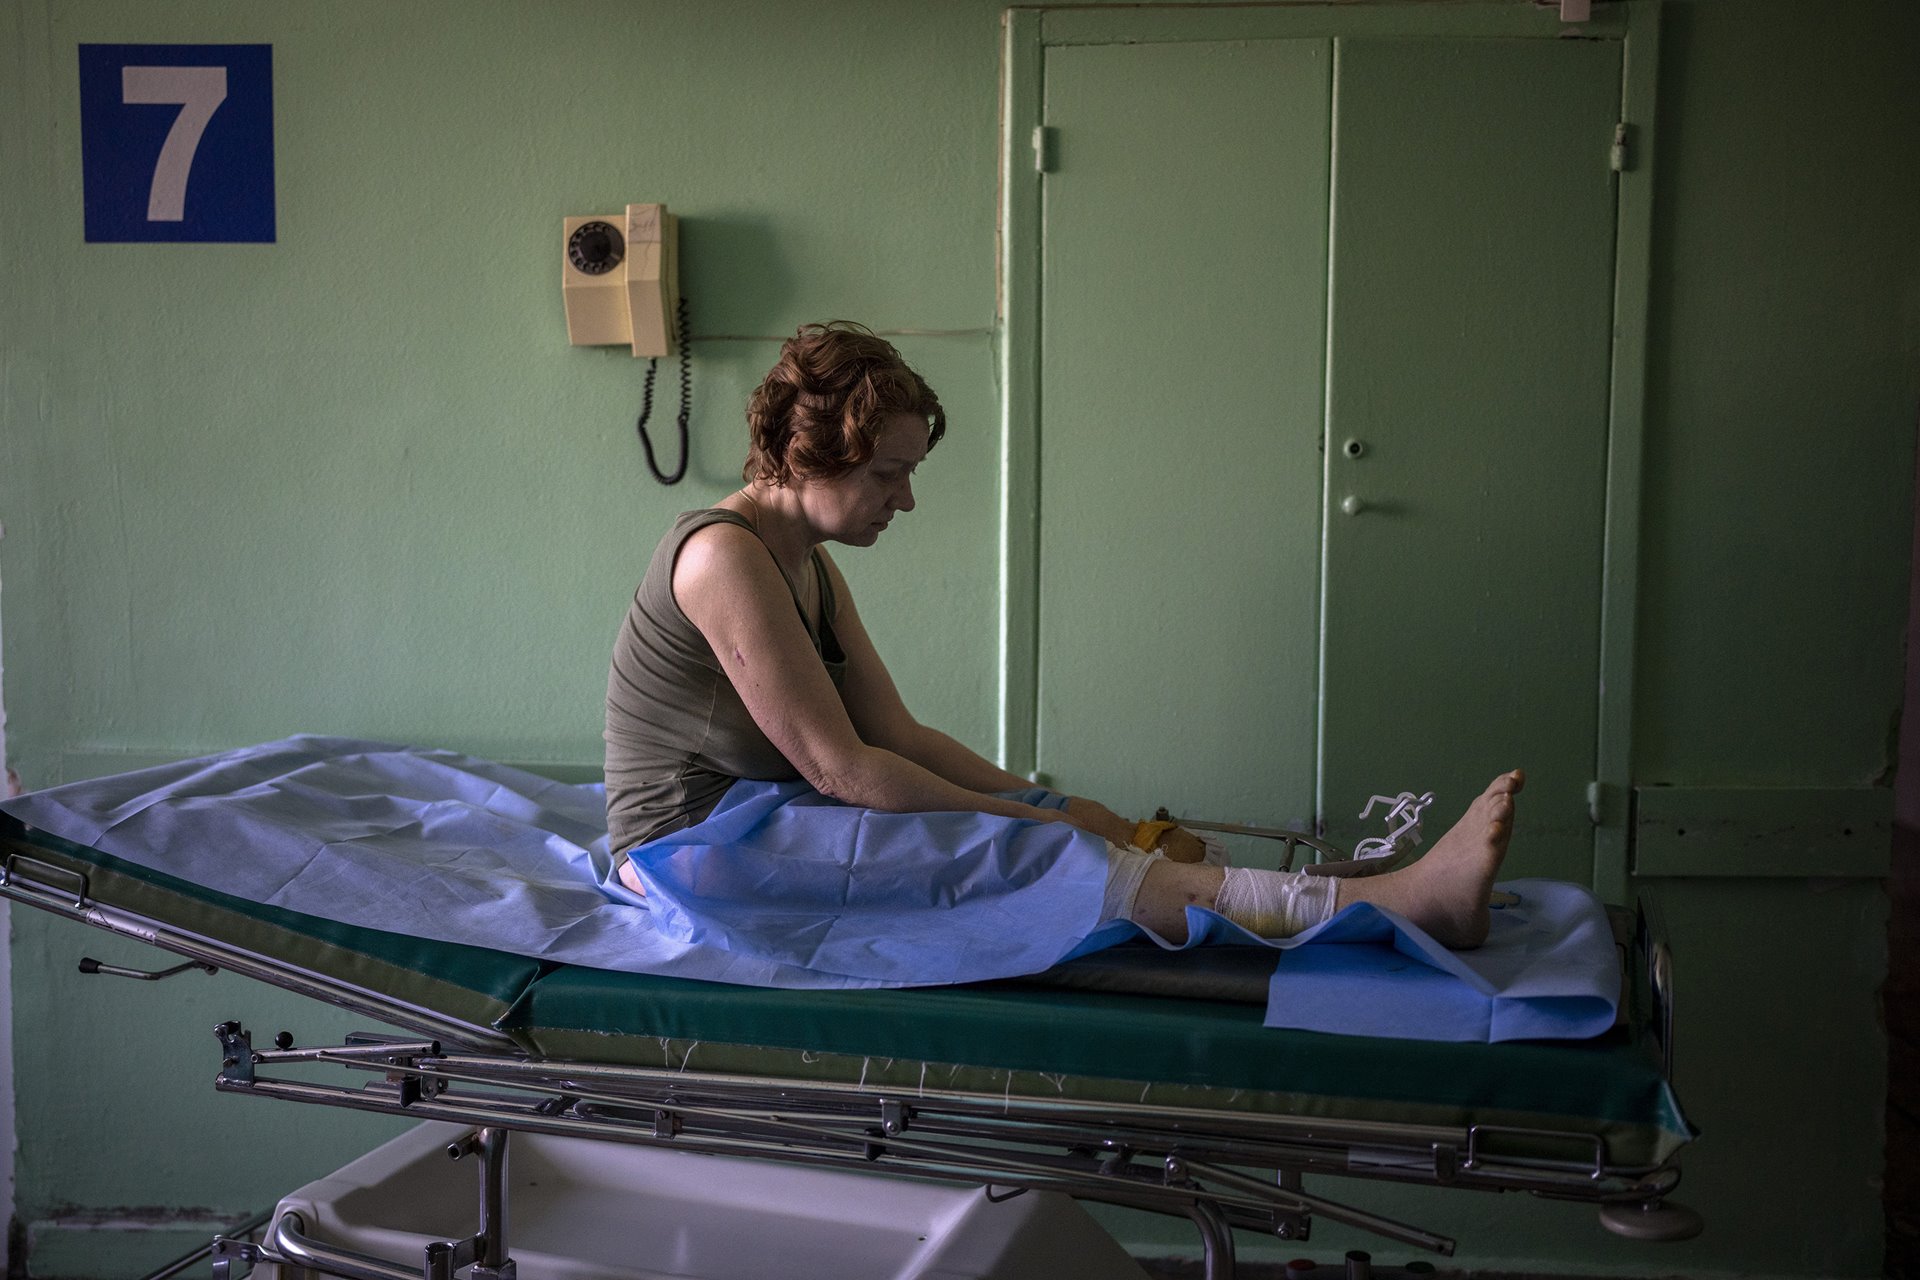 Olena Viter (45) waits outside an operating theater before surgery, at a public hospital in Kyiv, Ukraine. Olena lost her leg when her village, Rozvazhiv, in the Kyiv region, was bombed on 14 March. Her 14-year-old son Ivan was killed in the attack.